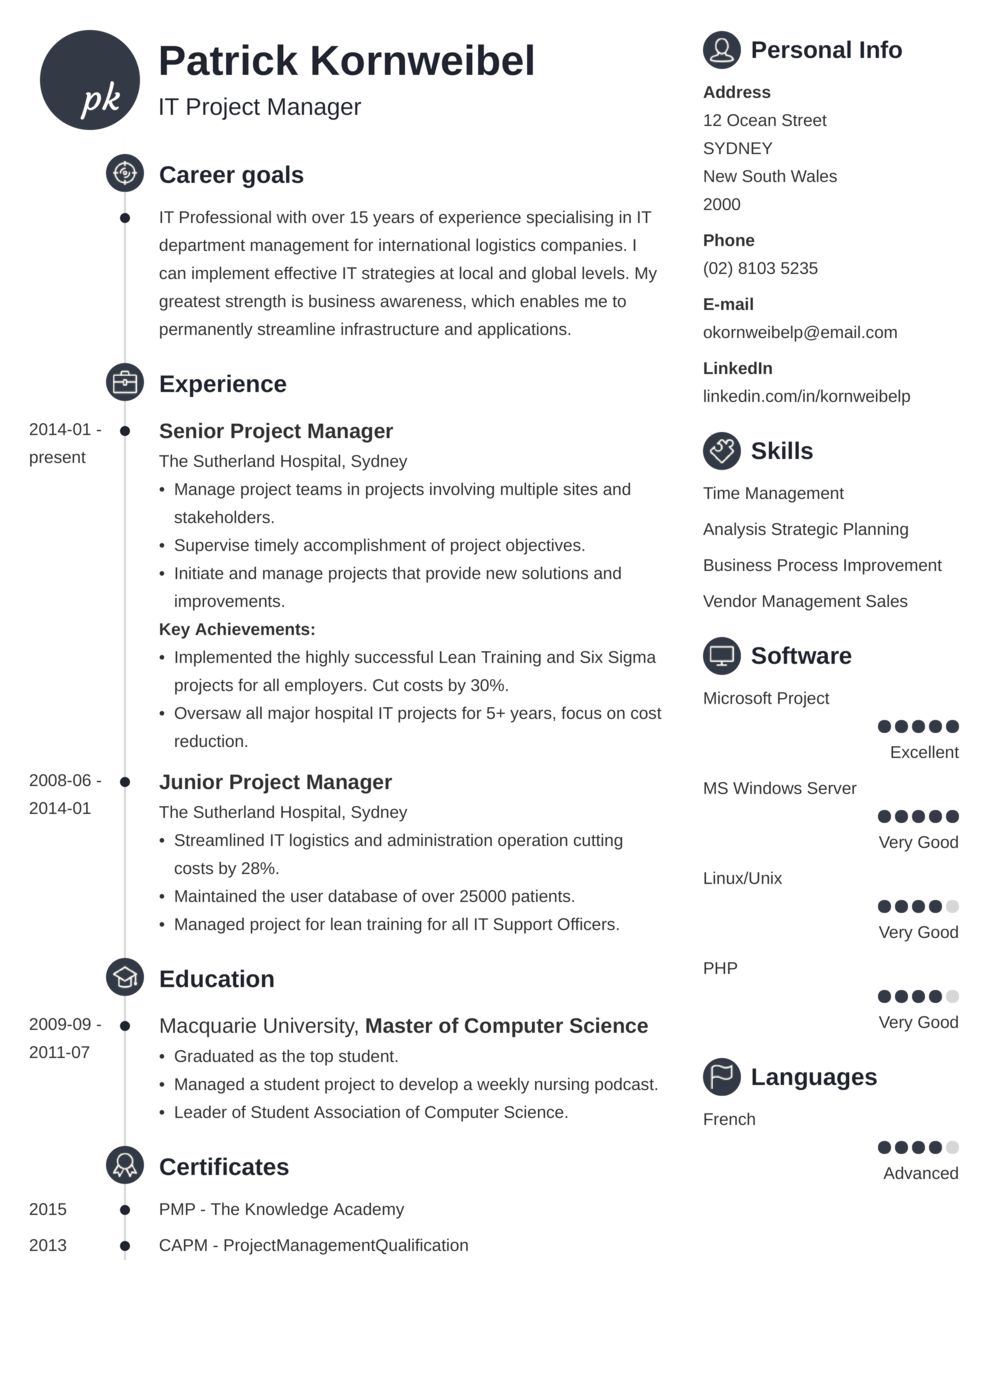 20+ Professional Resume Templates for Any Job [Download]